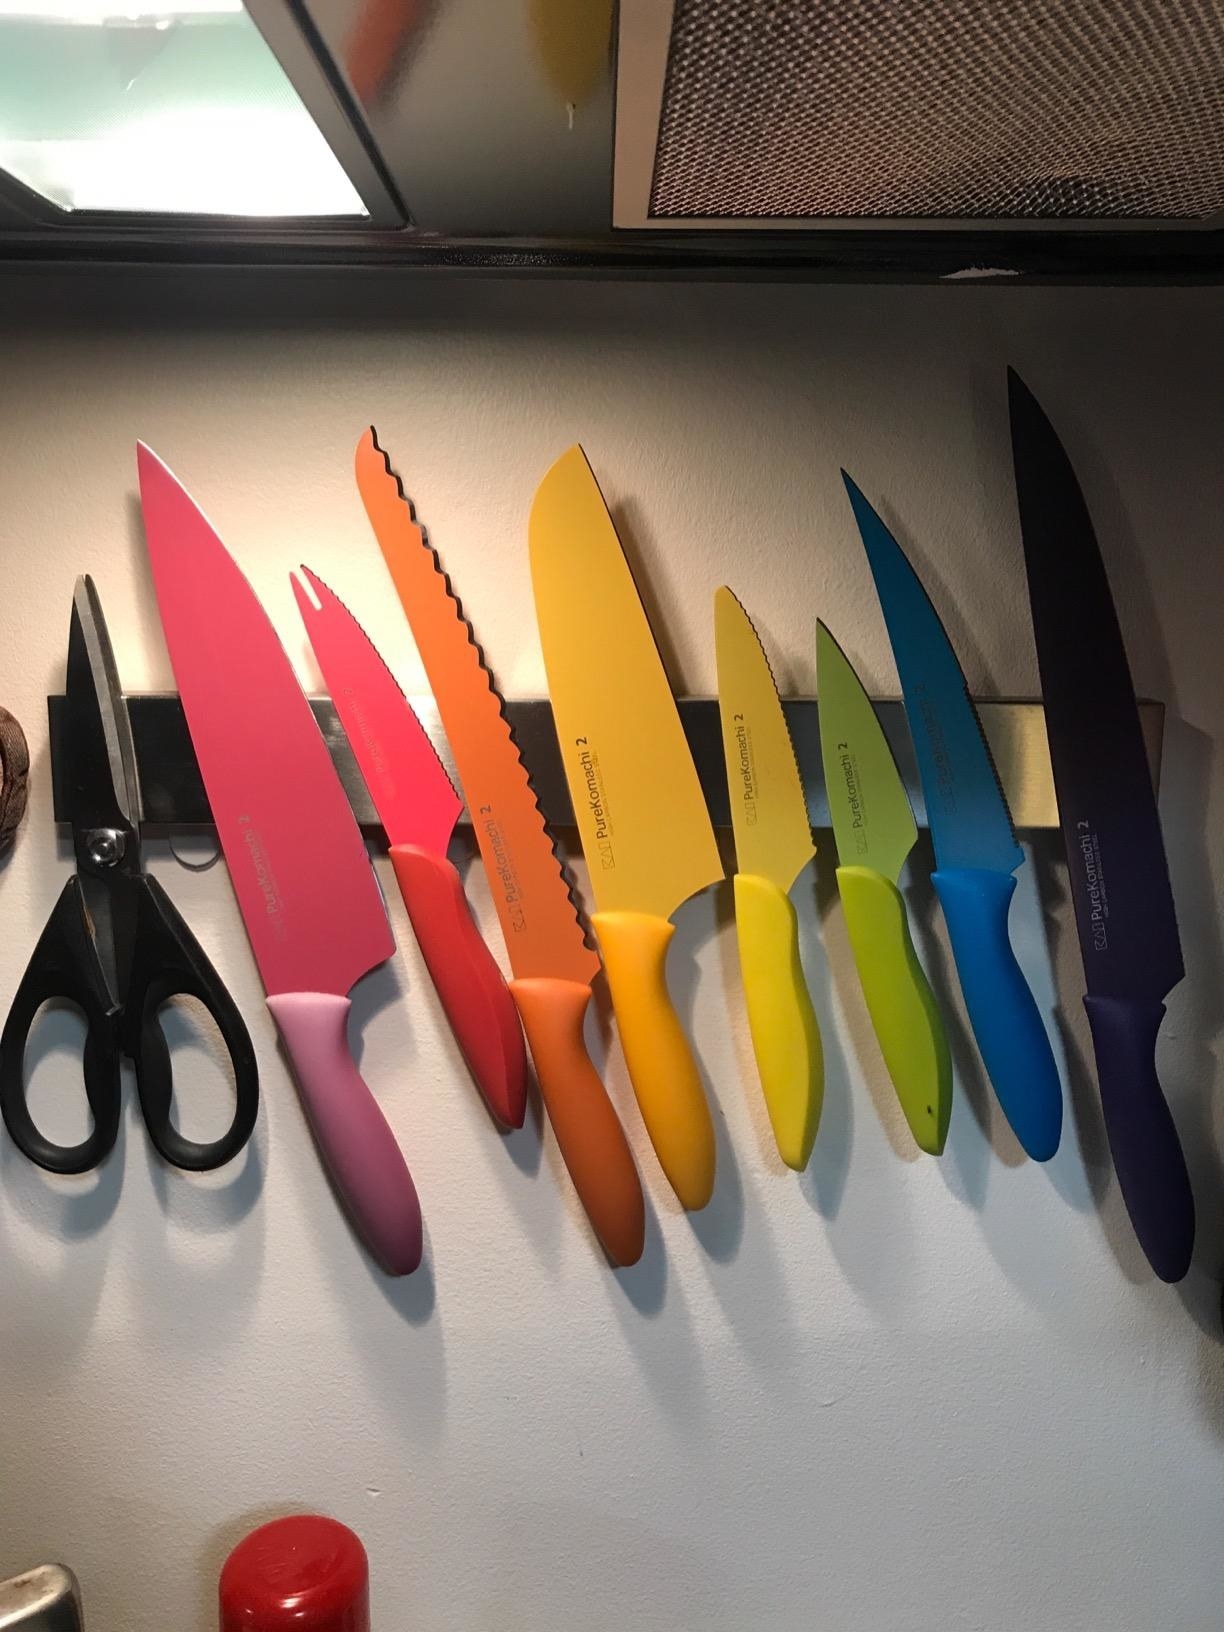 A reviewer photo of the knife holder, magnetically mounted to the side of the fridge